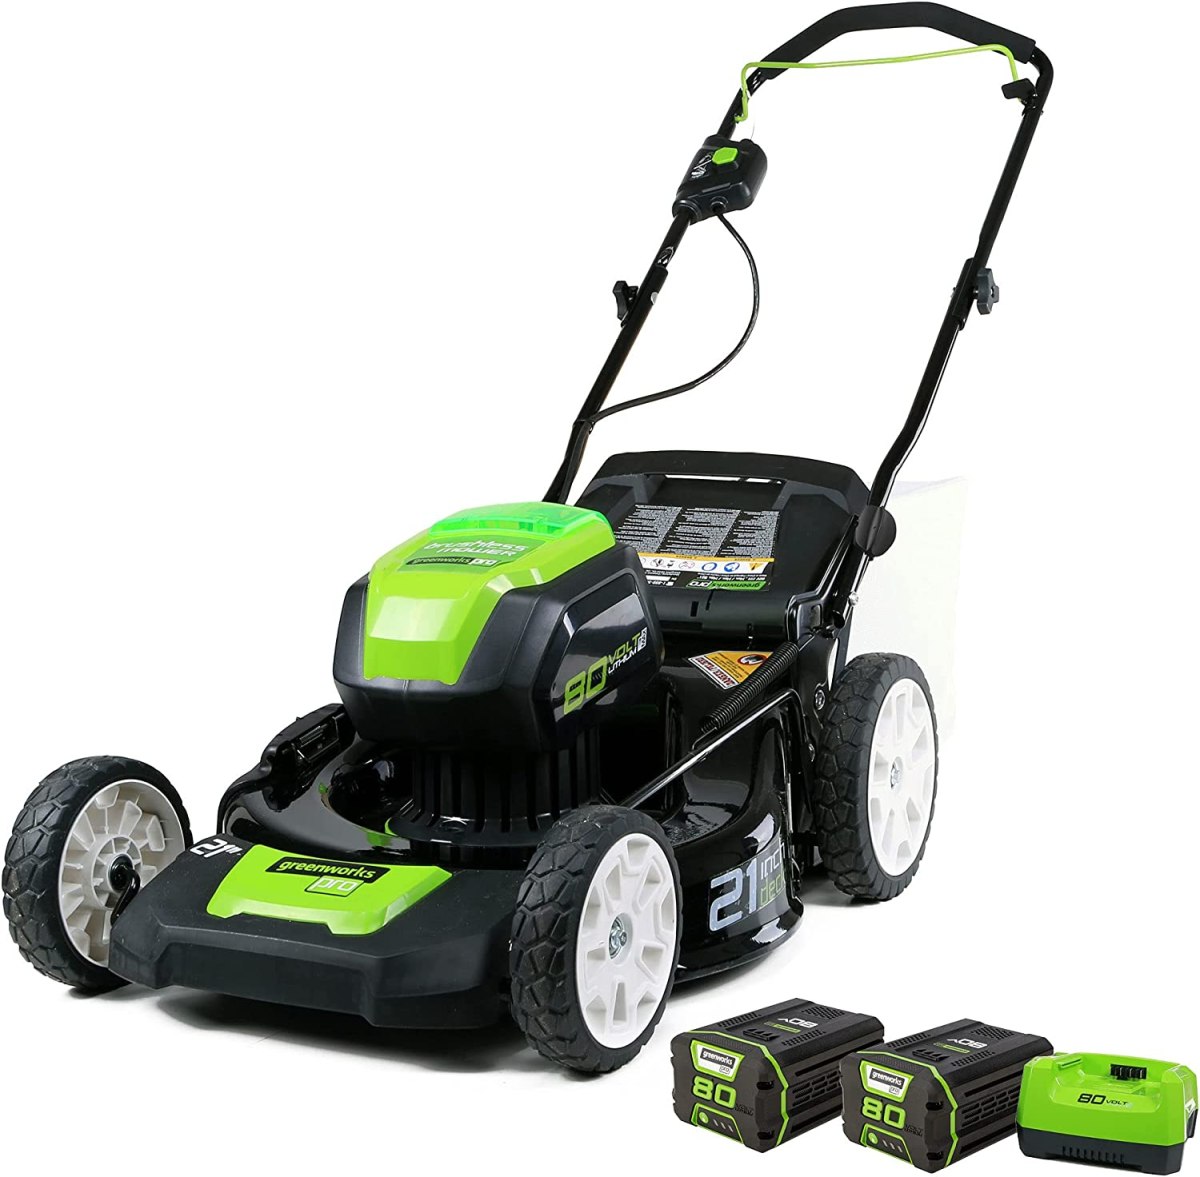 Greenworks Mowers and Power Tools Are On Sale